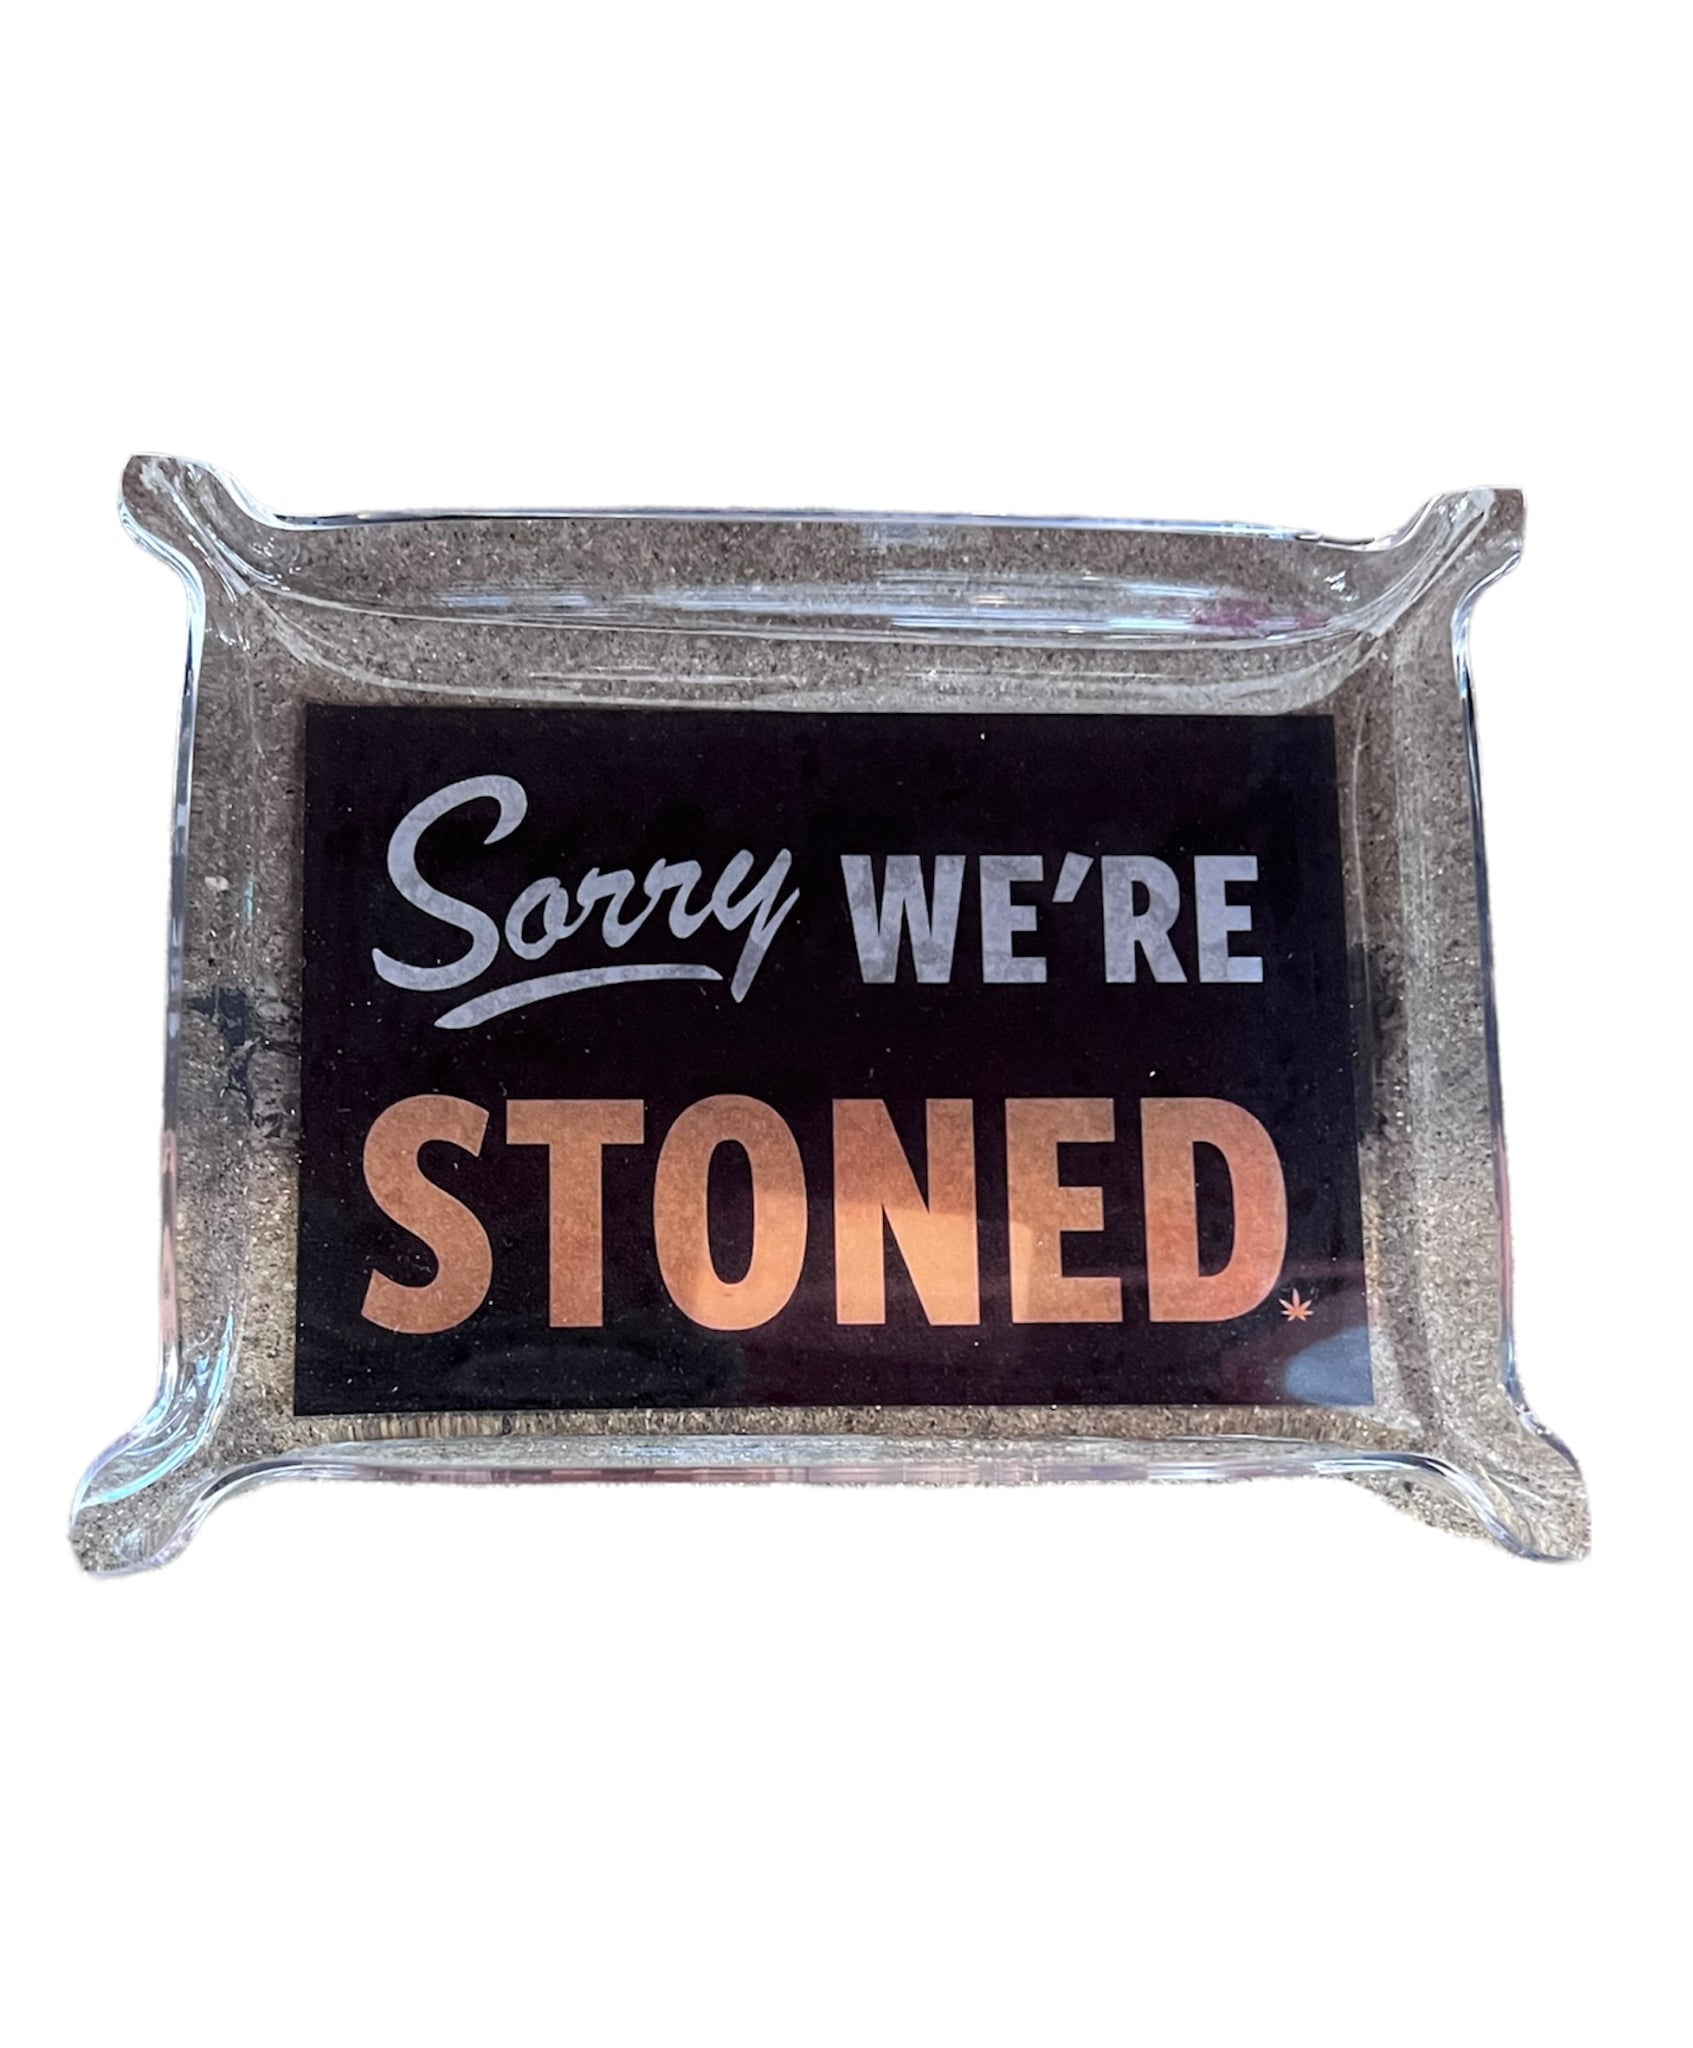 SORRY WE'RE STONED RESIN TRAY (6X8)